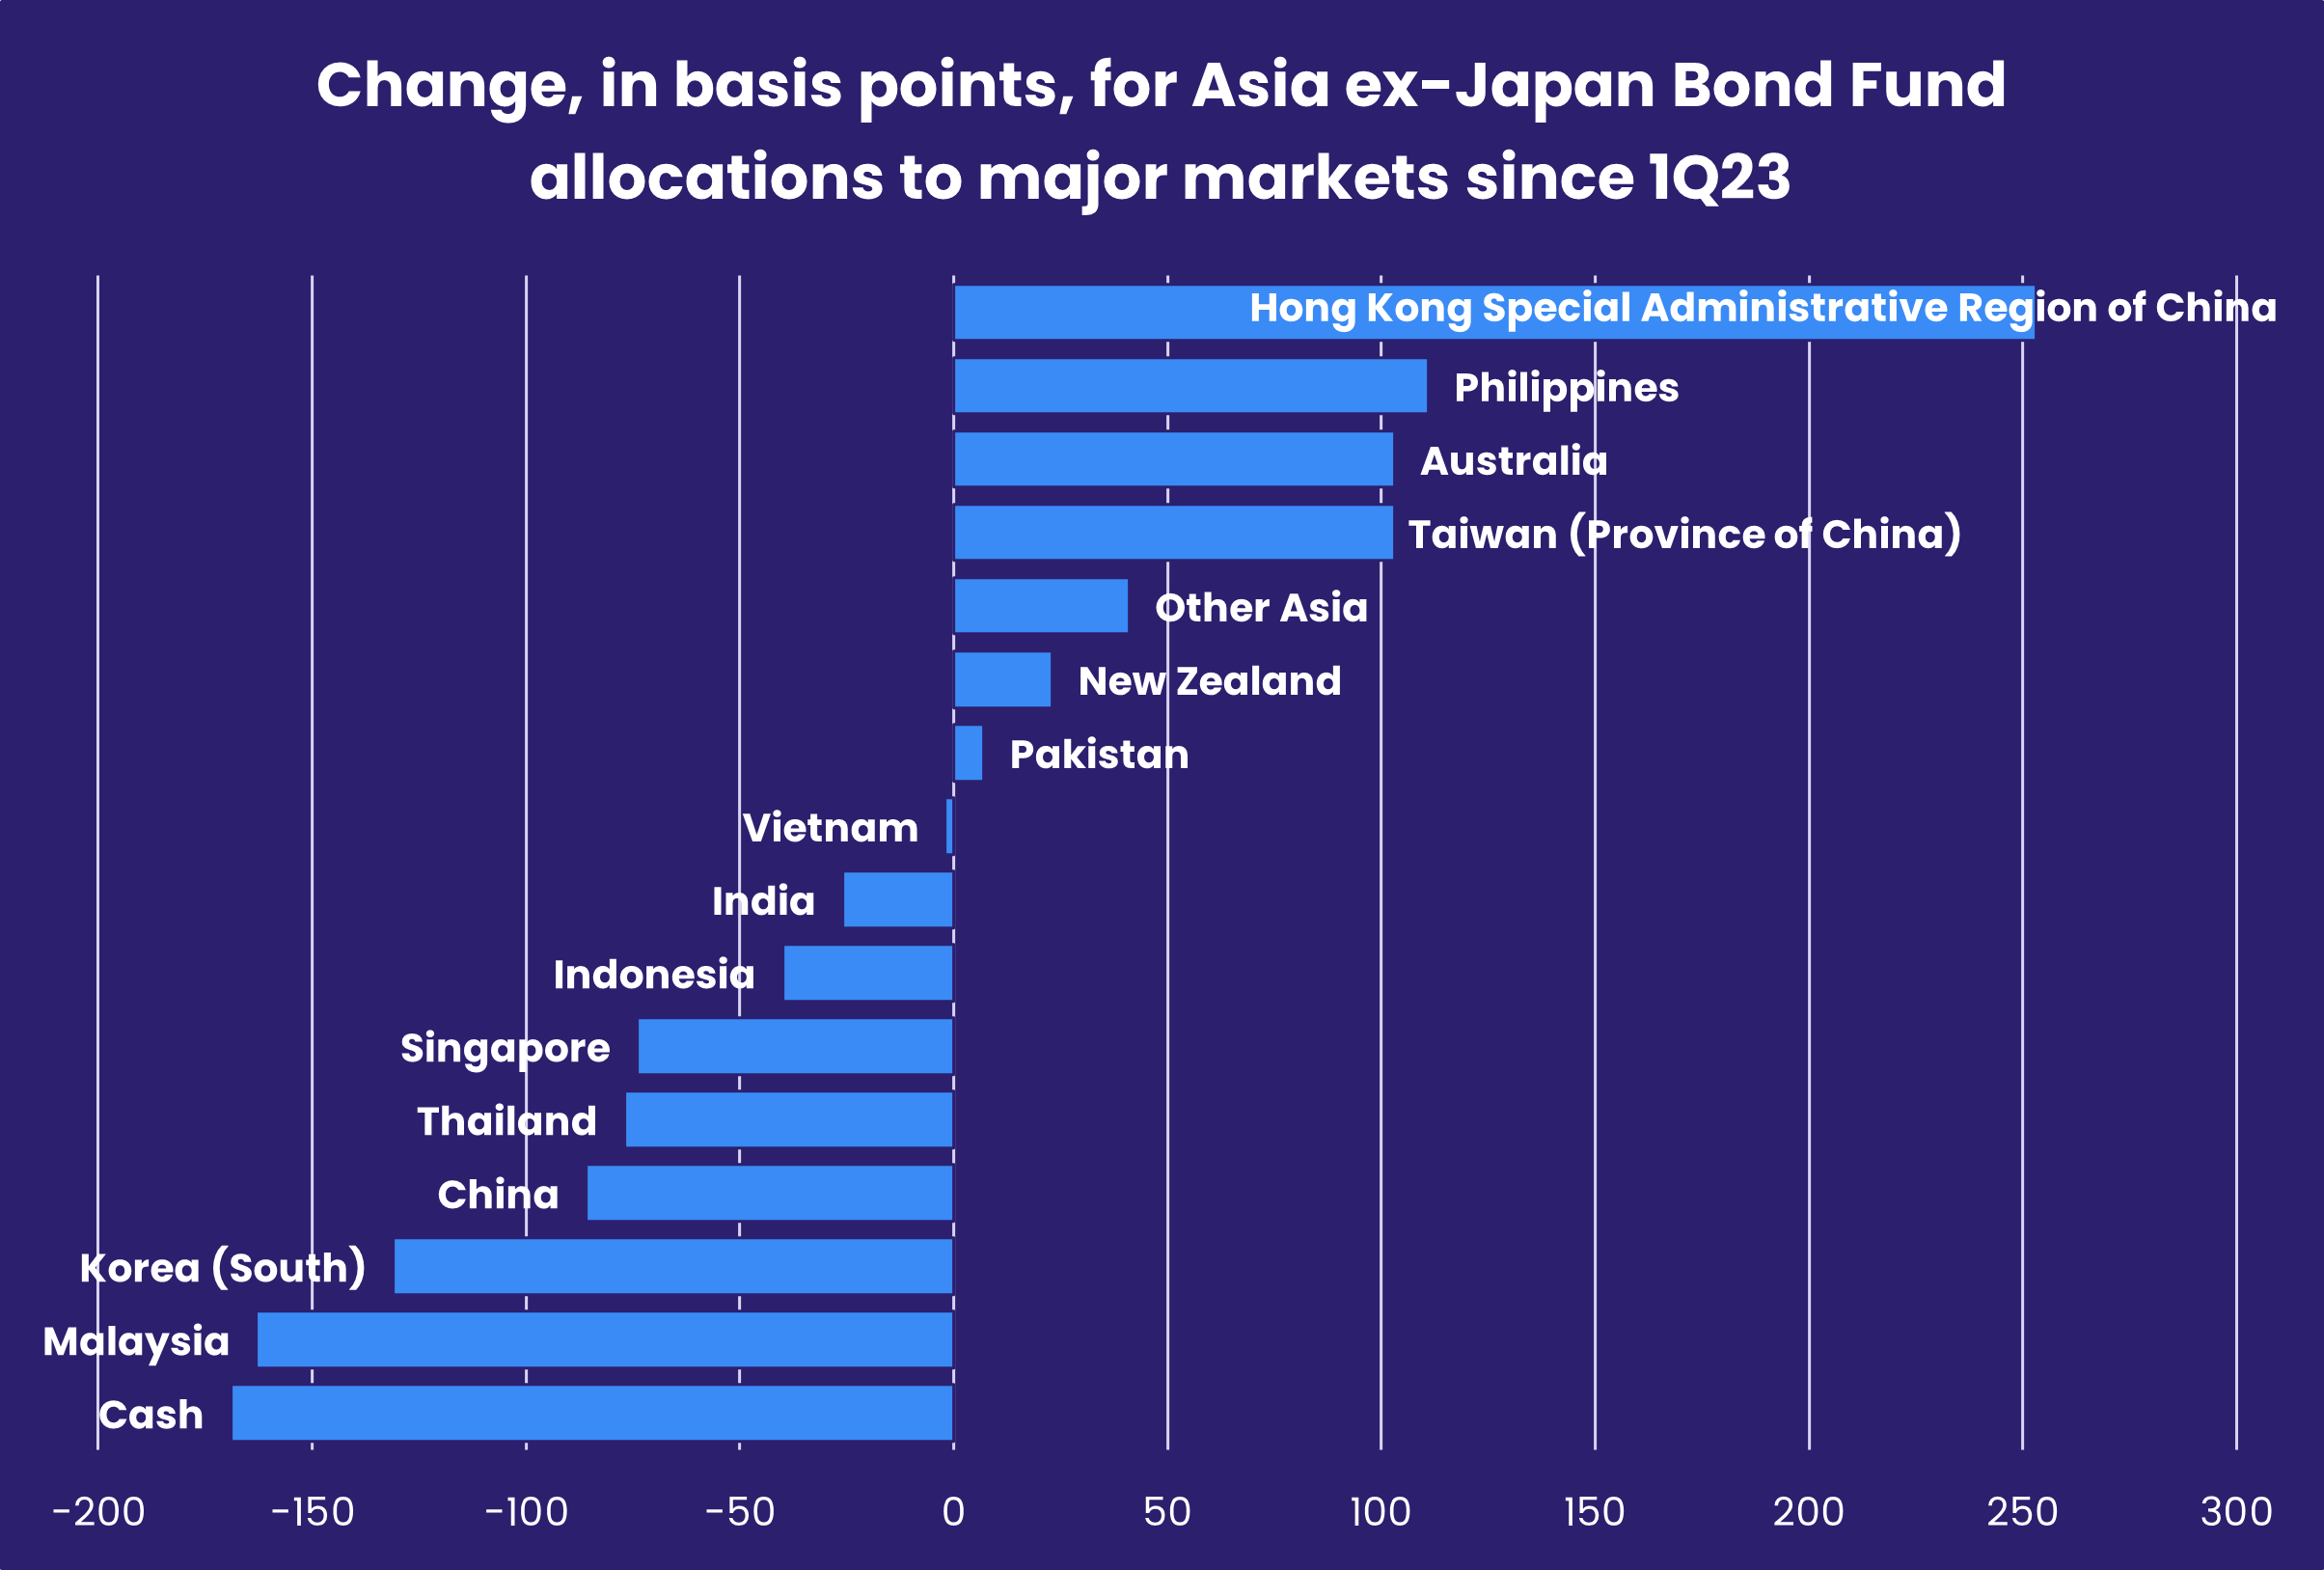 Chart representing 'Change, in basis points, for Asia ex-Japan Bond Fund allocations to major markets since 1Q23'